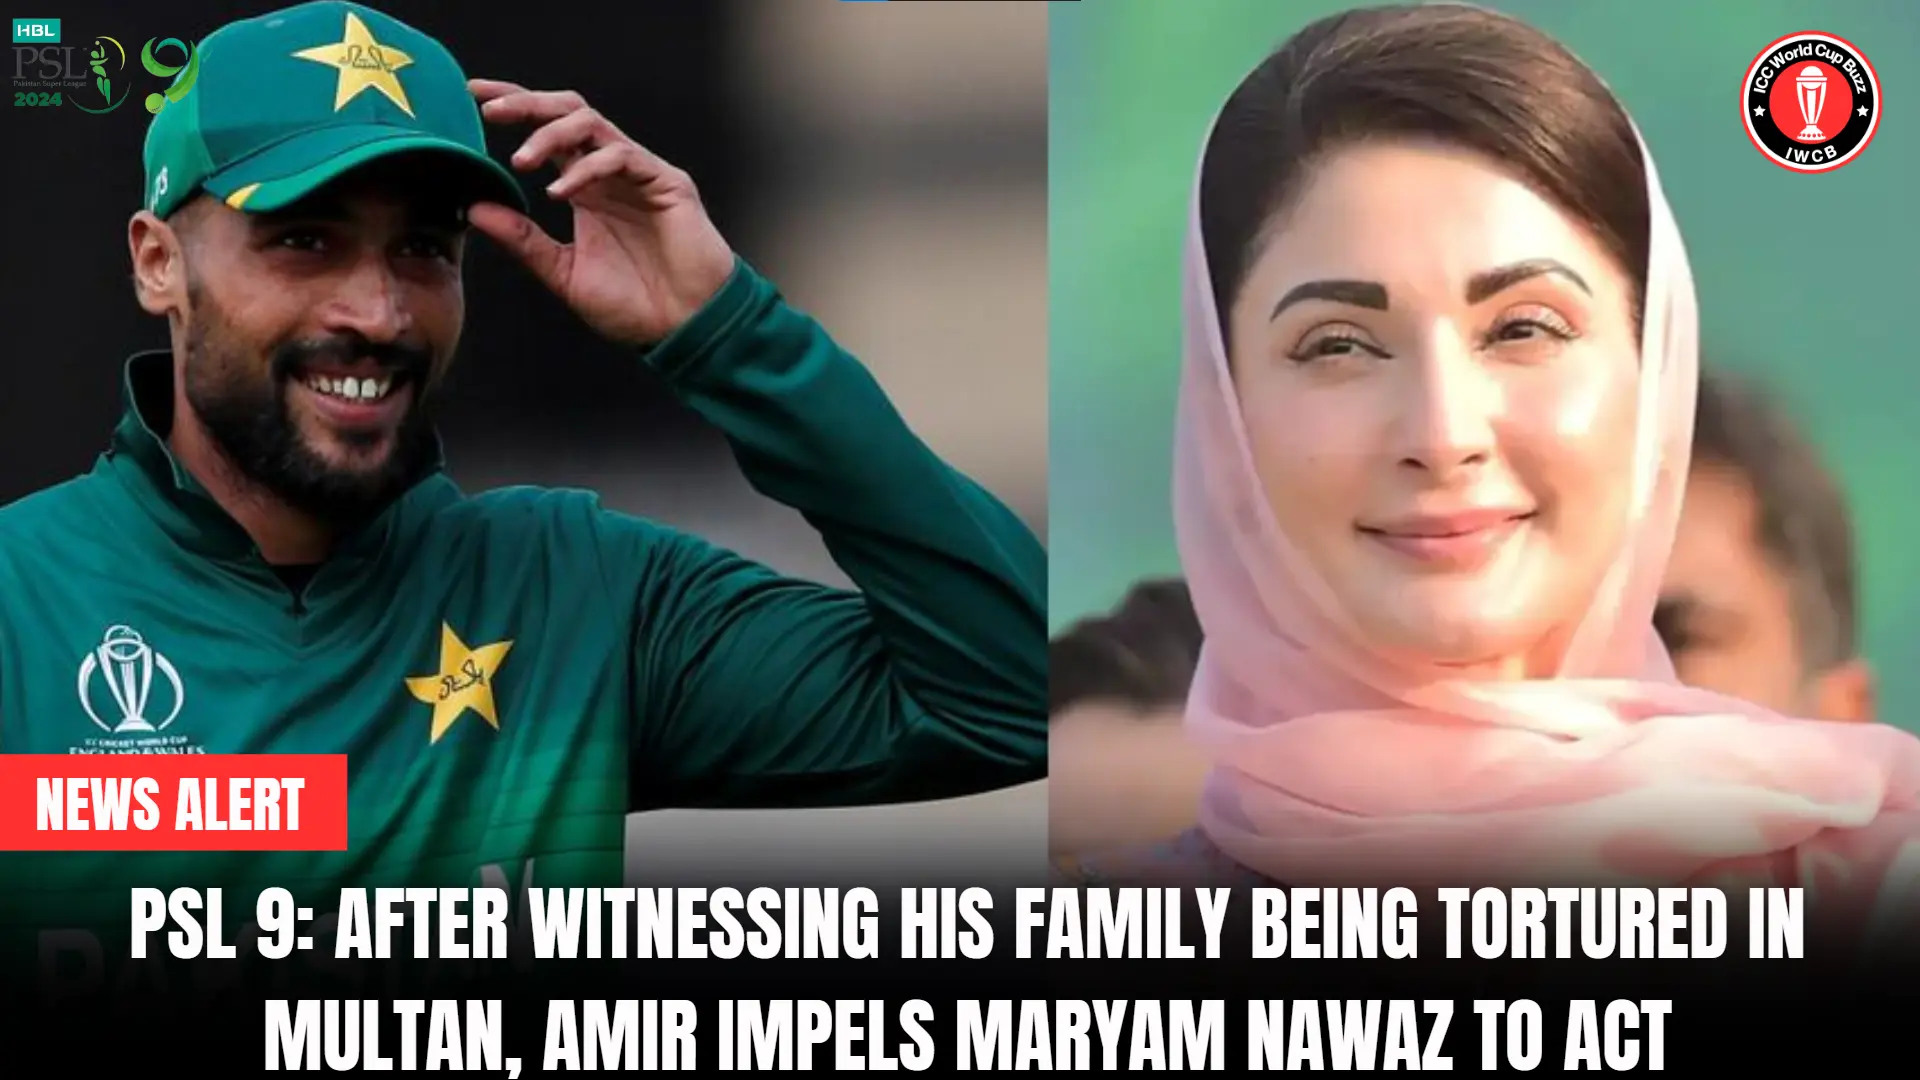 PSL 9 After witnessing his family being tortured in Multan, Amir impels Maryam Nawaz to act